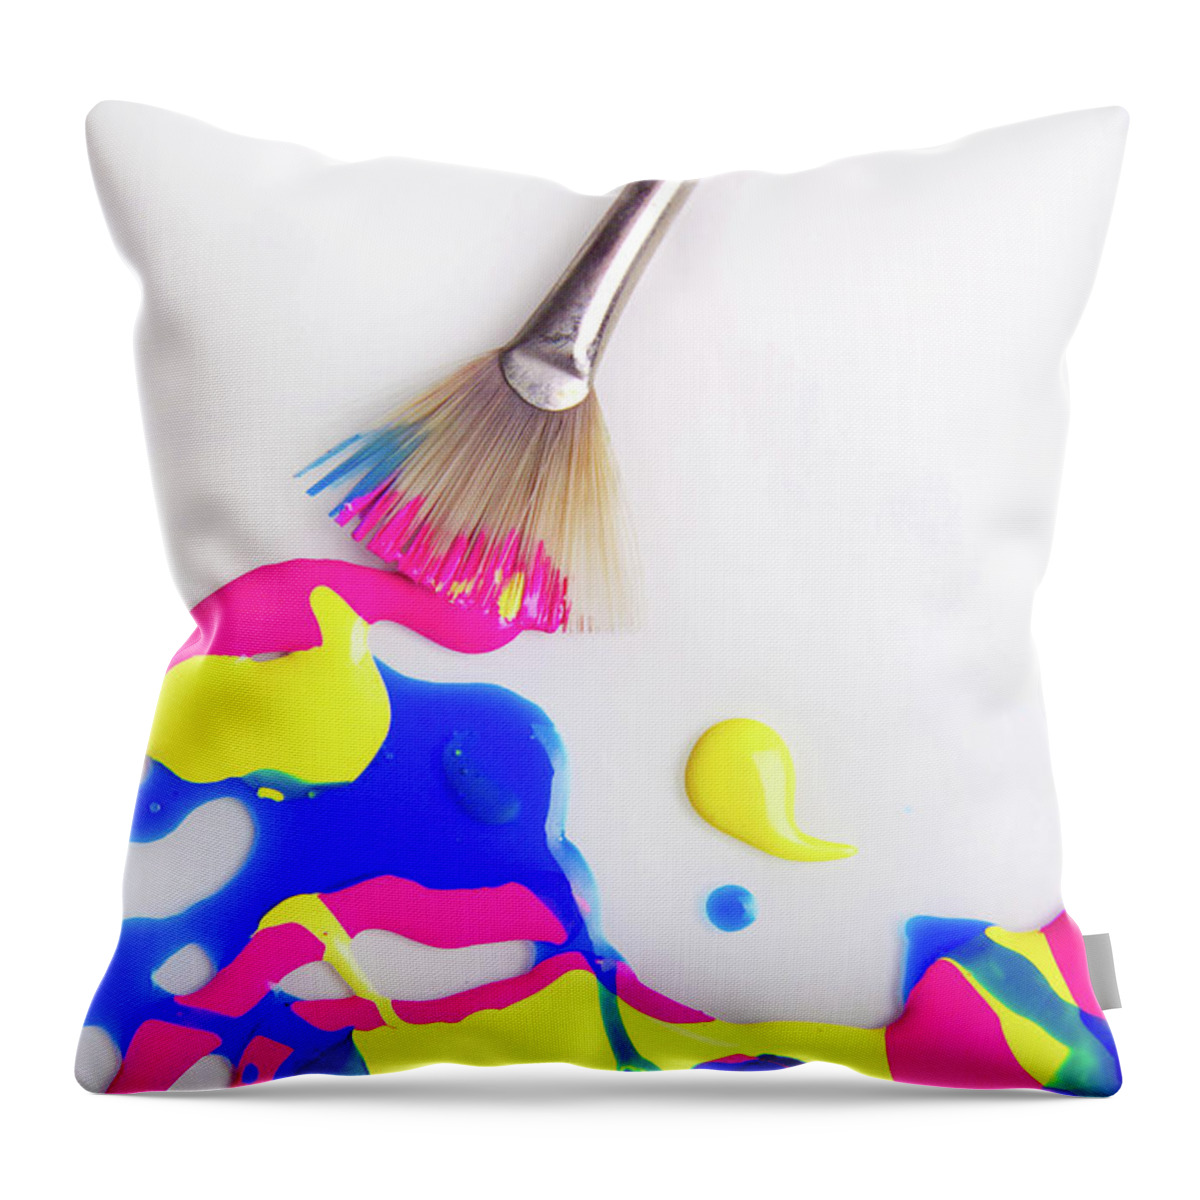 Paint Throw Pillow featuring the photograph Paint Splatter with Fan Brush by Diane Diederich